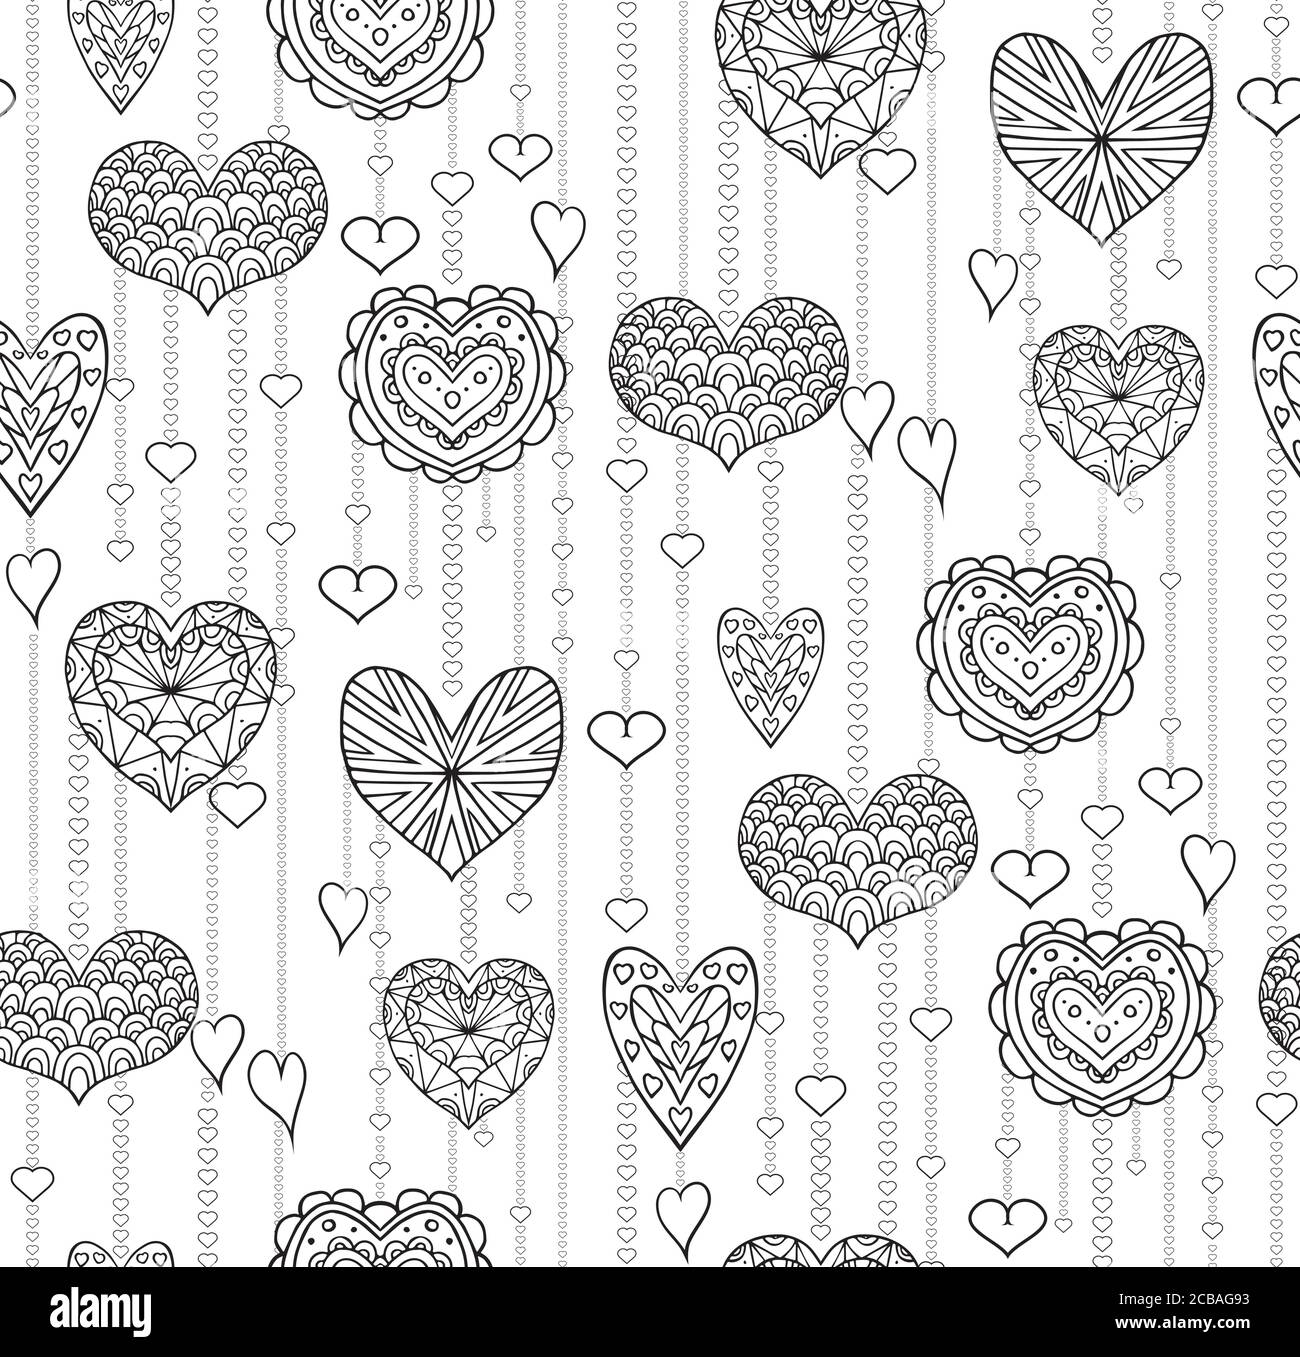 Seamless Black And White Texture With Hanging Doodle Hearts For Your Creativity Stock Vector 